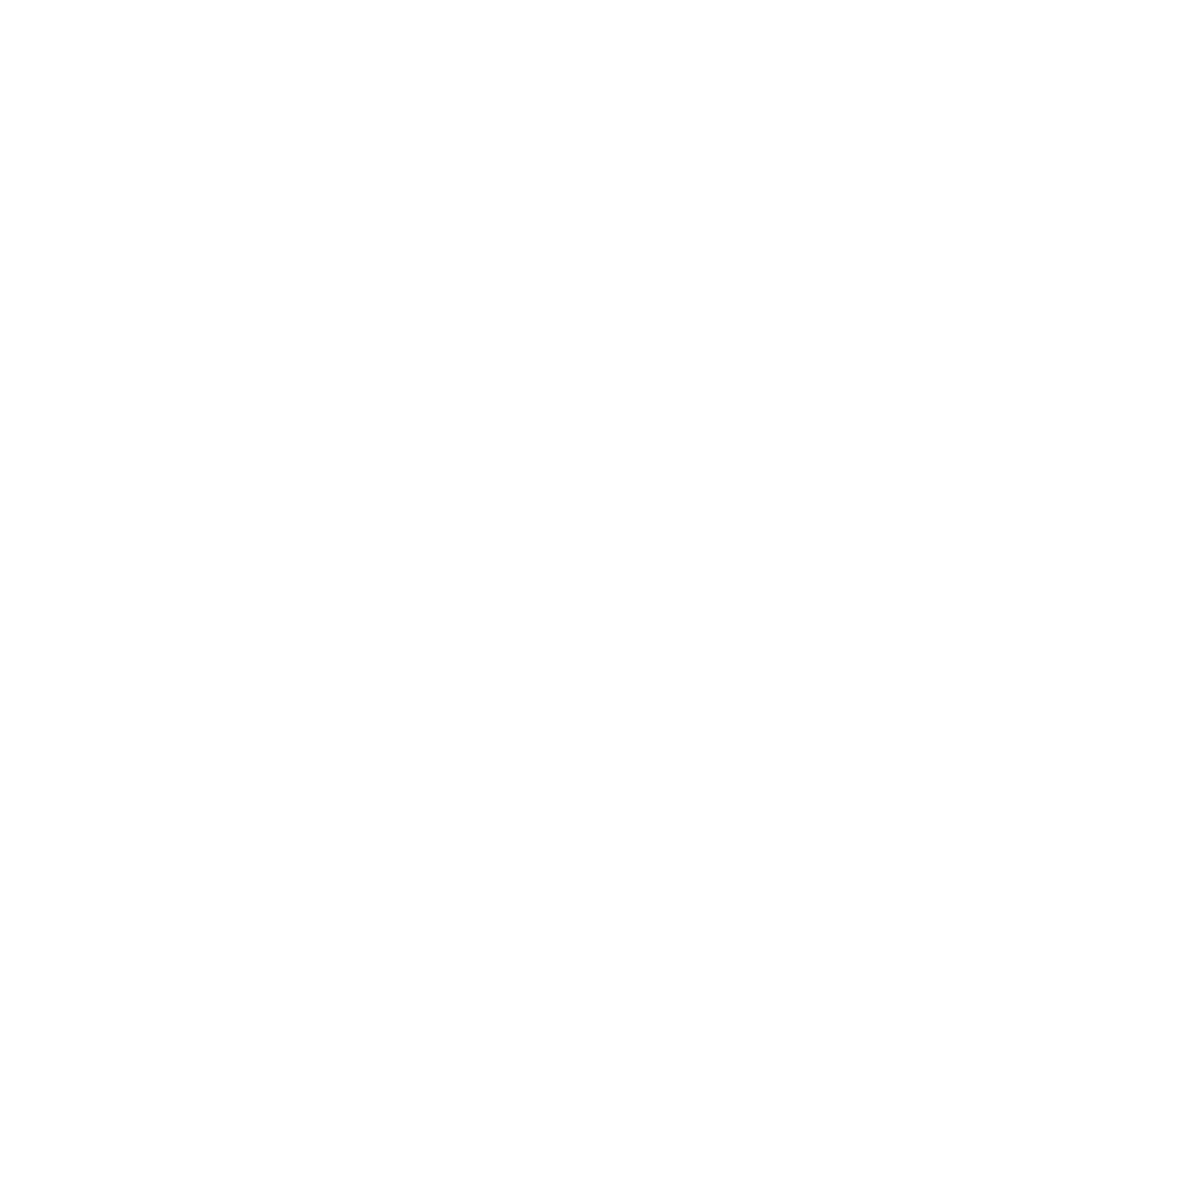 Image of music note